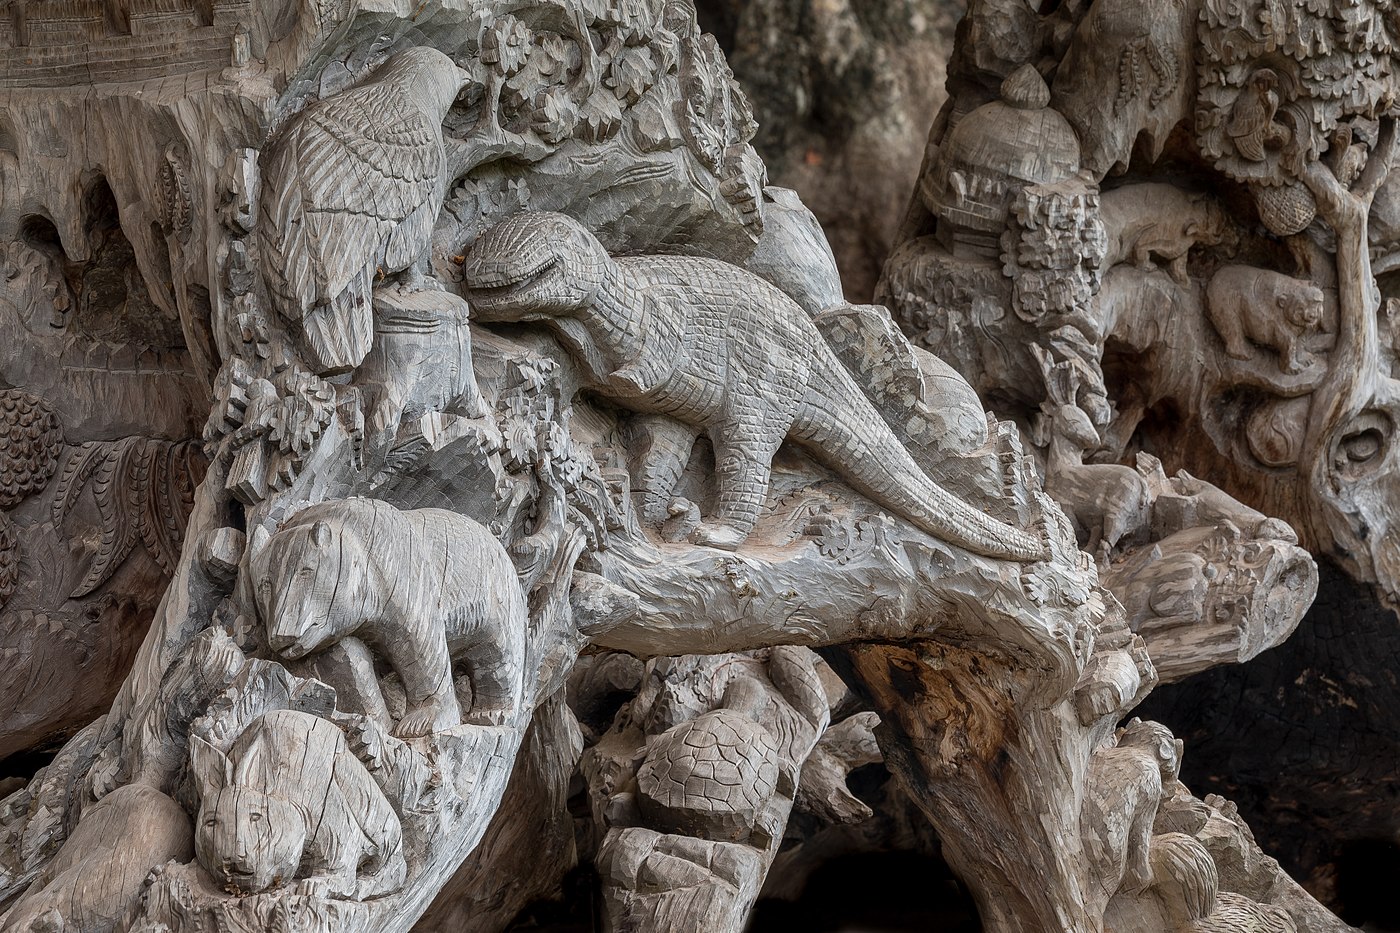 Carved tree with reliefs of dinosaur and animals